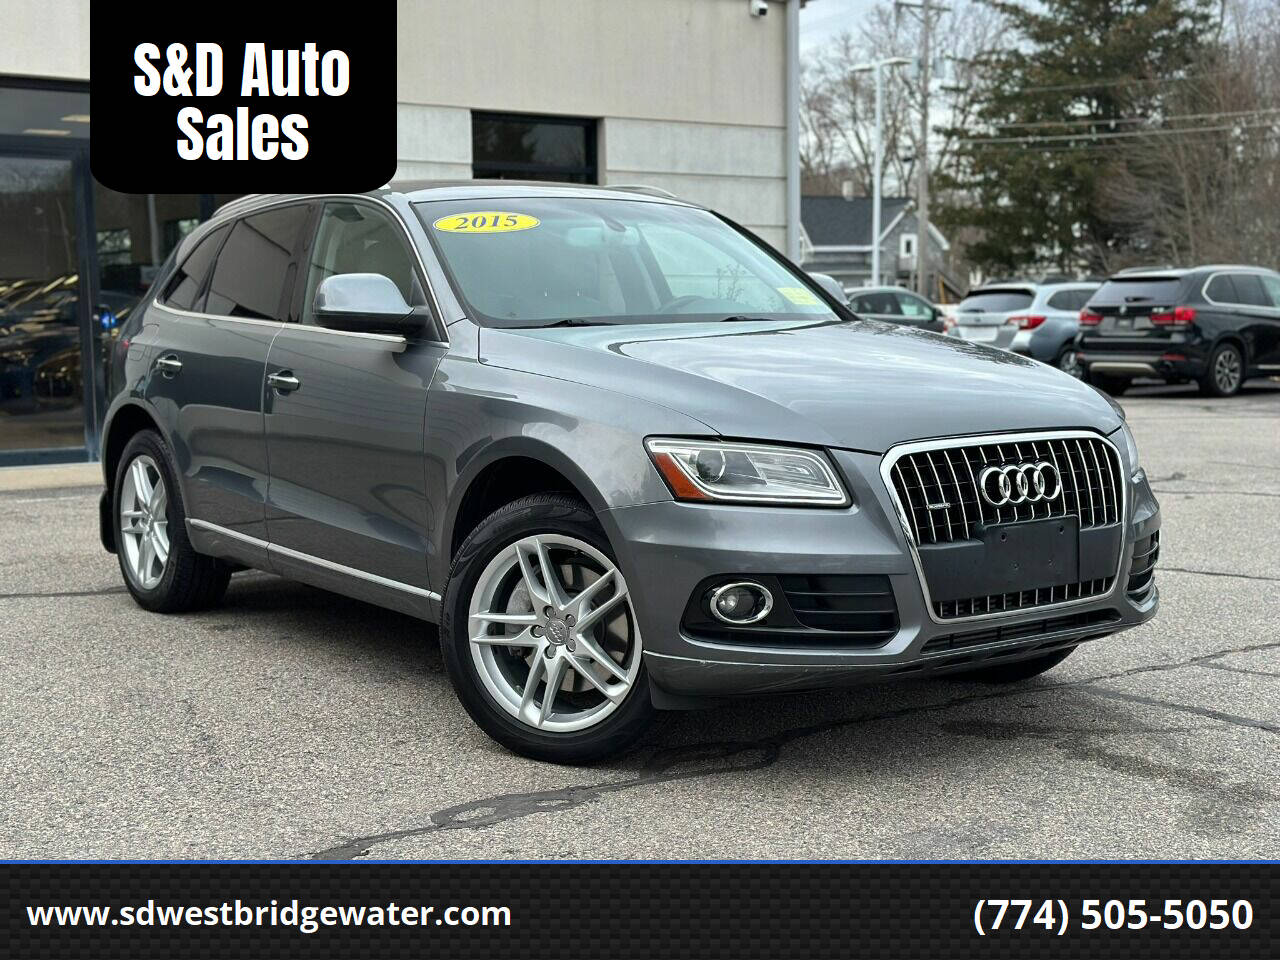 Audi Q5 For Sale In Nashua, NH - ®